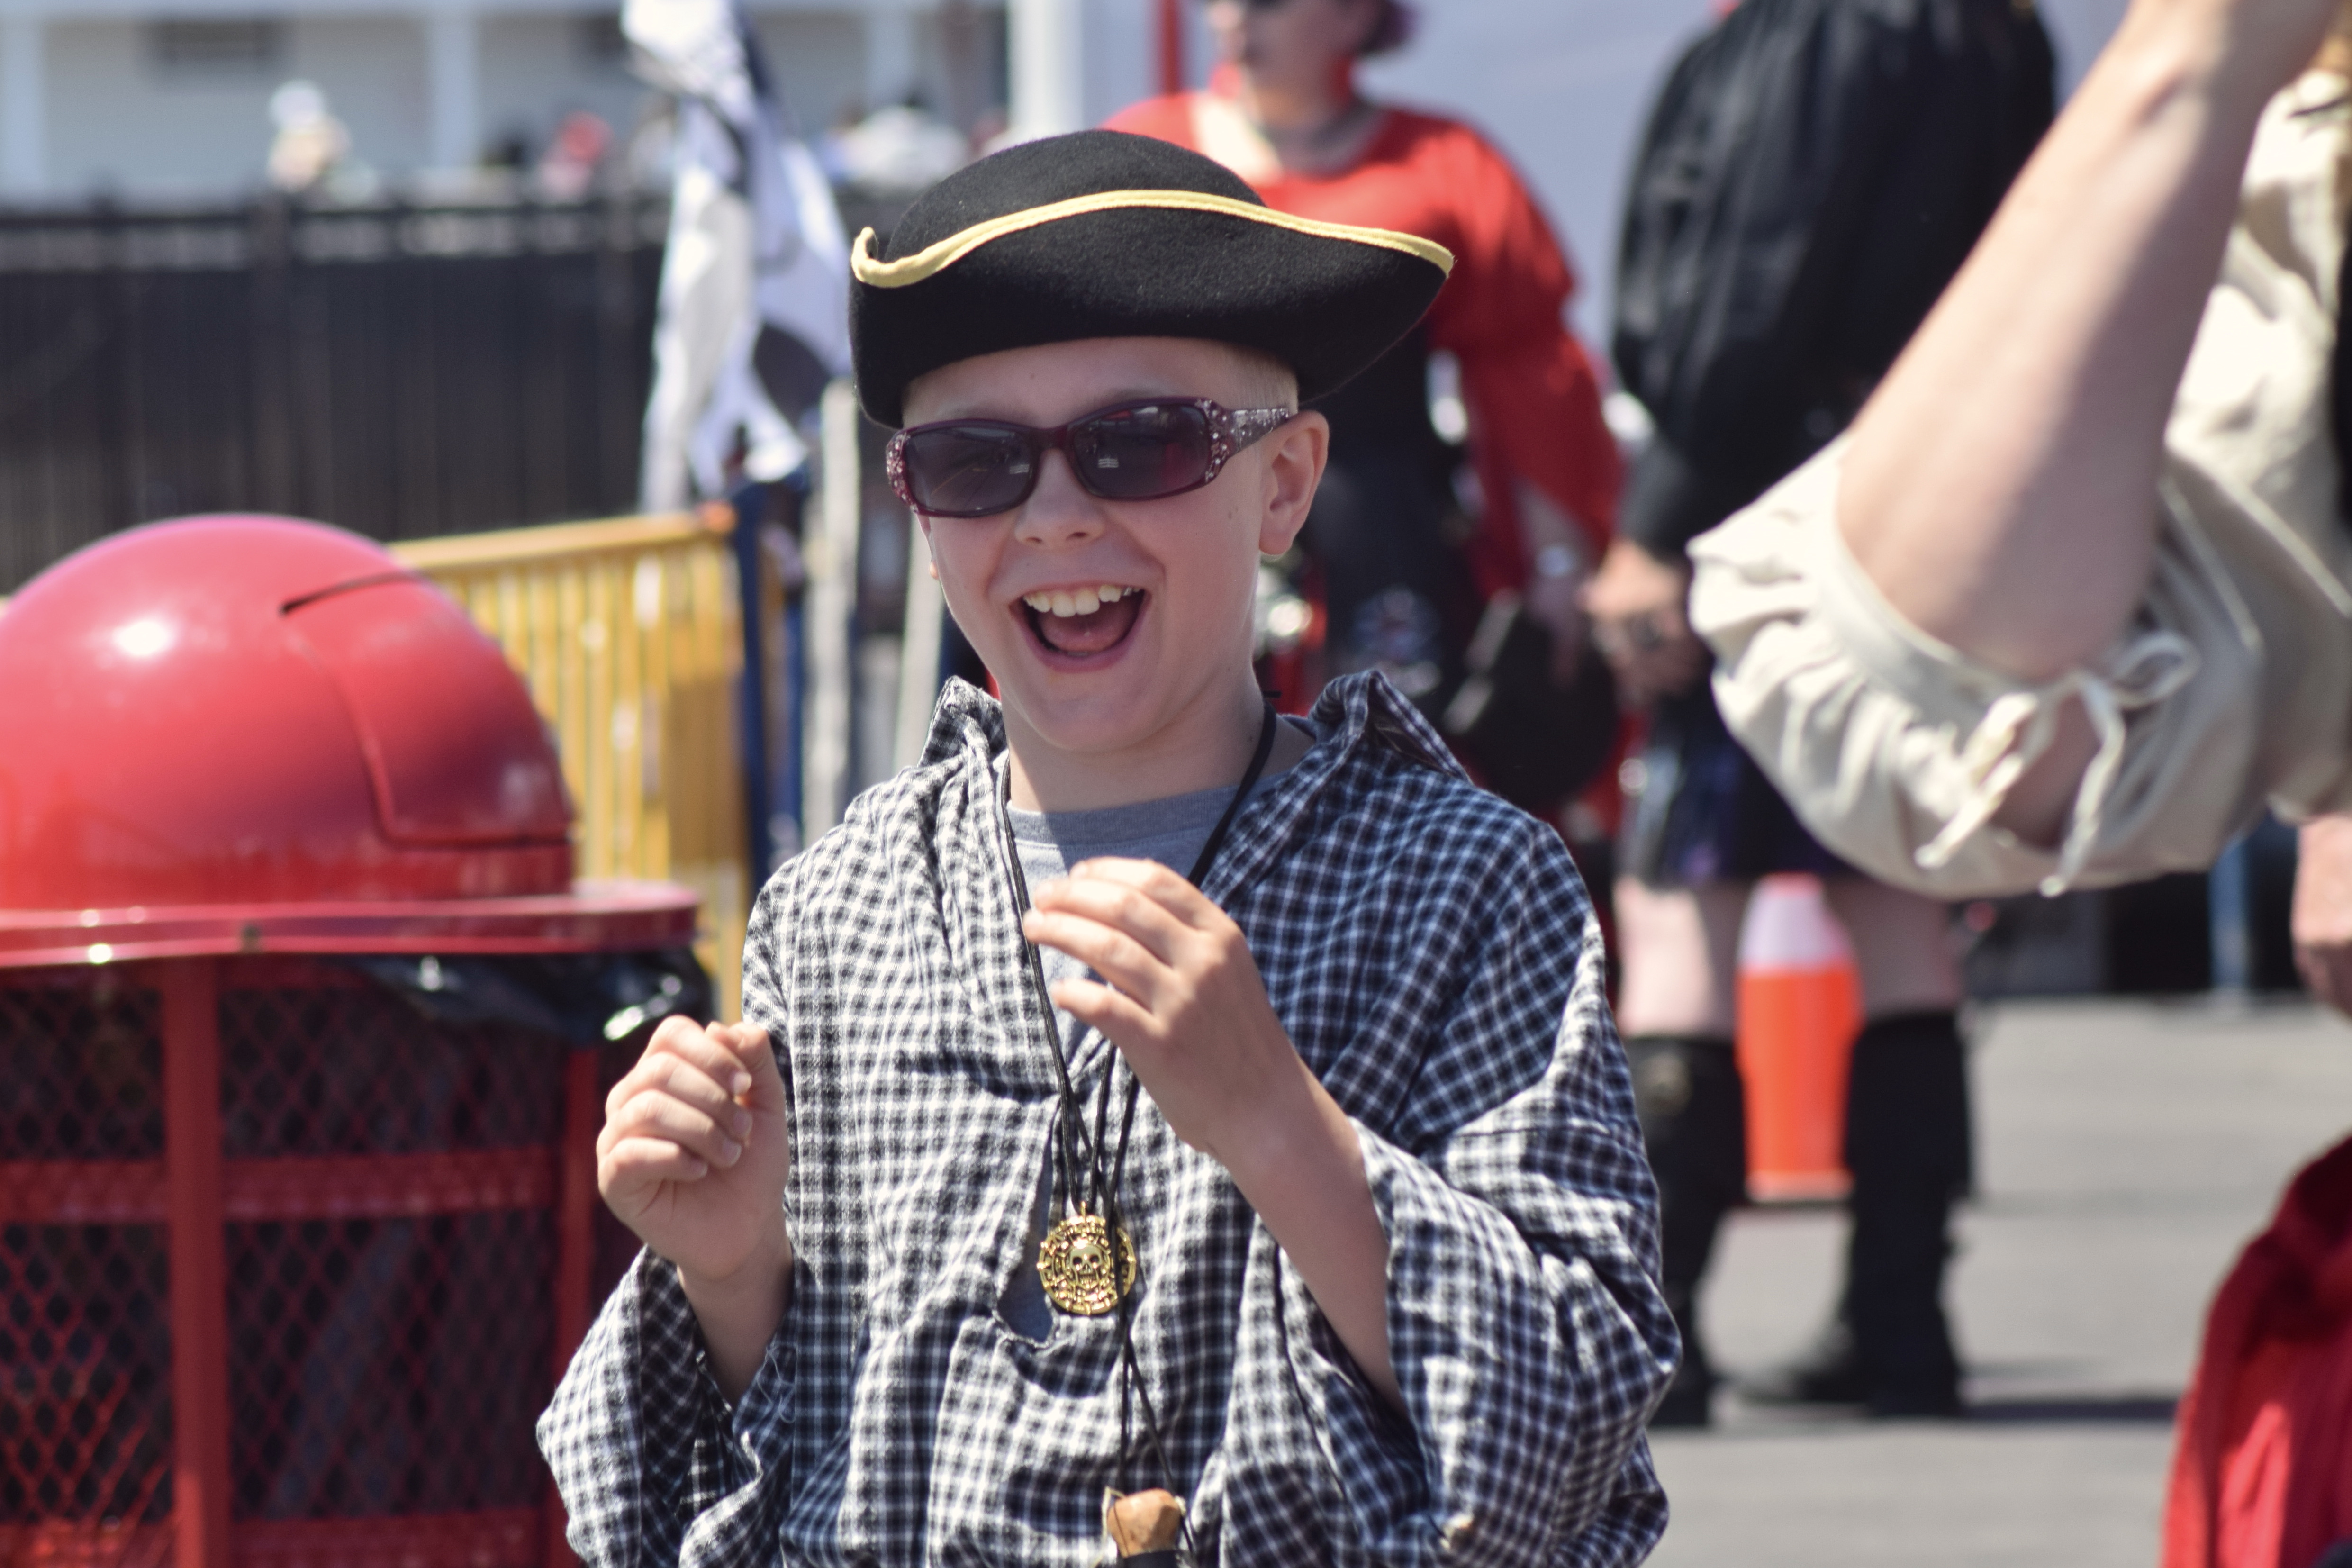 Great Lakes Pirate Festival will set sail to Mackinac Island this summer 